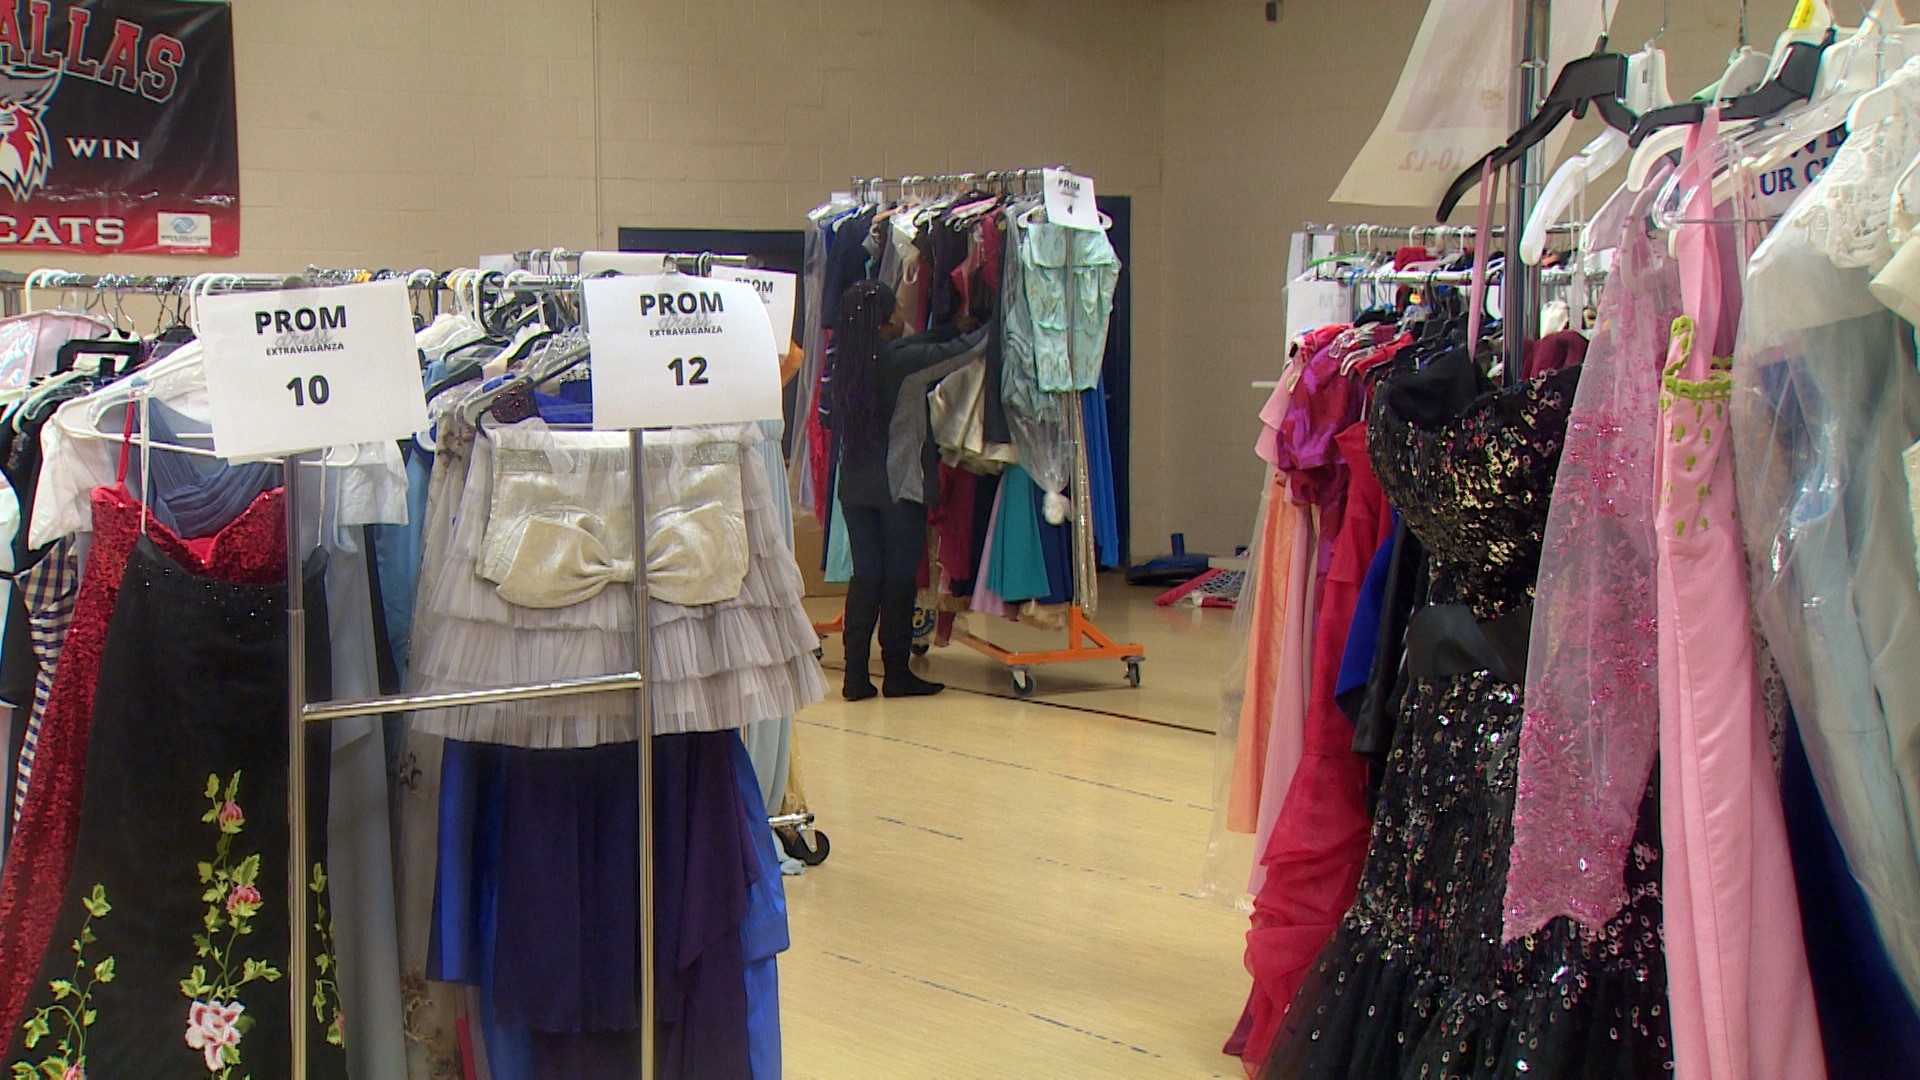 All Dallas-area teens who are attending prom this year were invited to browse through a selection of gently-used gowns, shoes, and accessories.